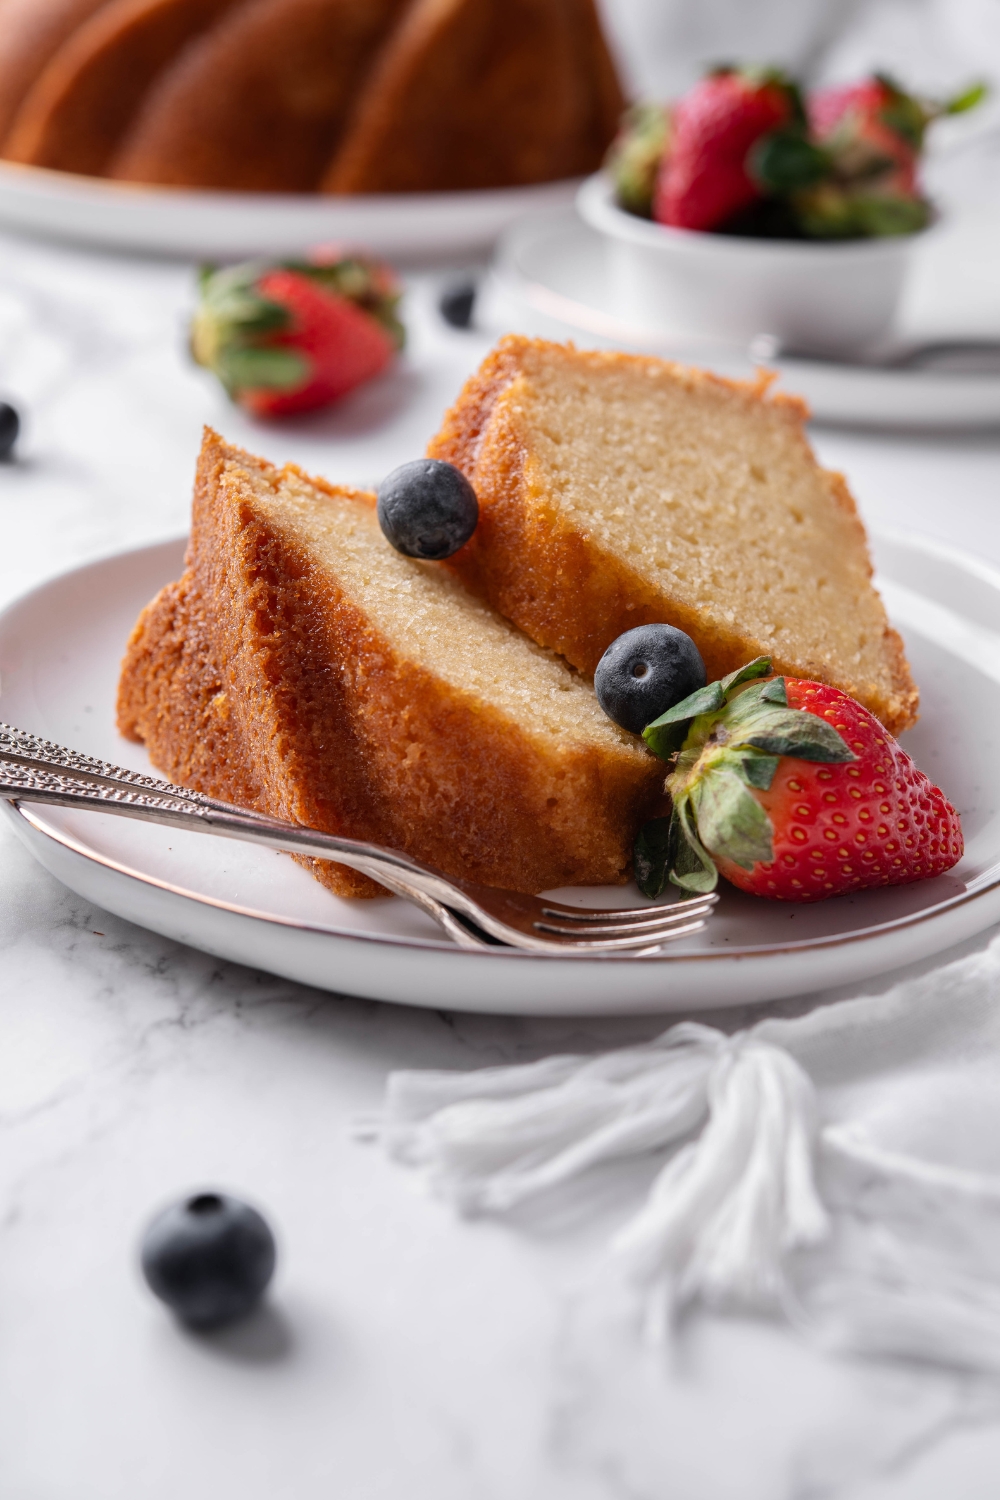 Two slices of buttermilk pound cake sit on a white plate. There are fresh berries and two forks resting on the plate as well.